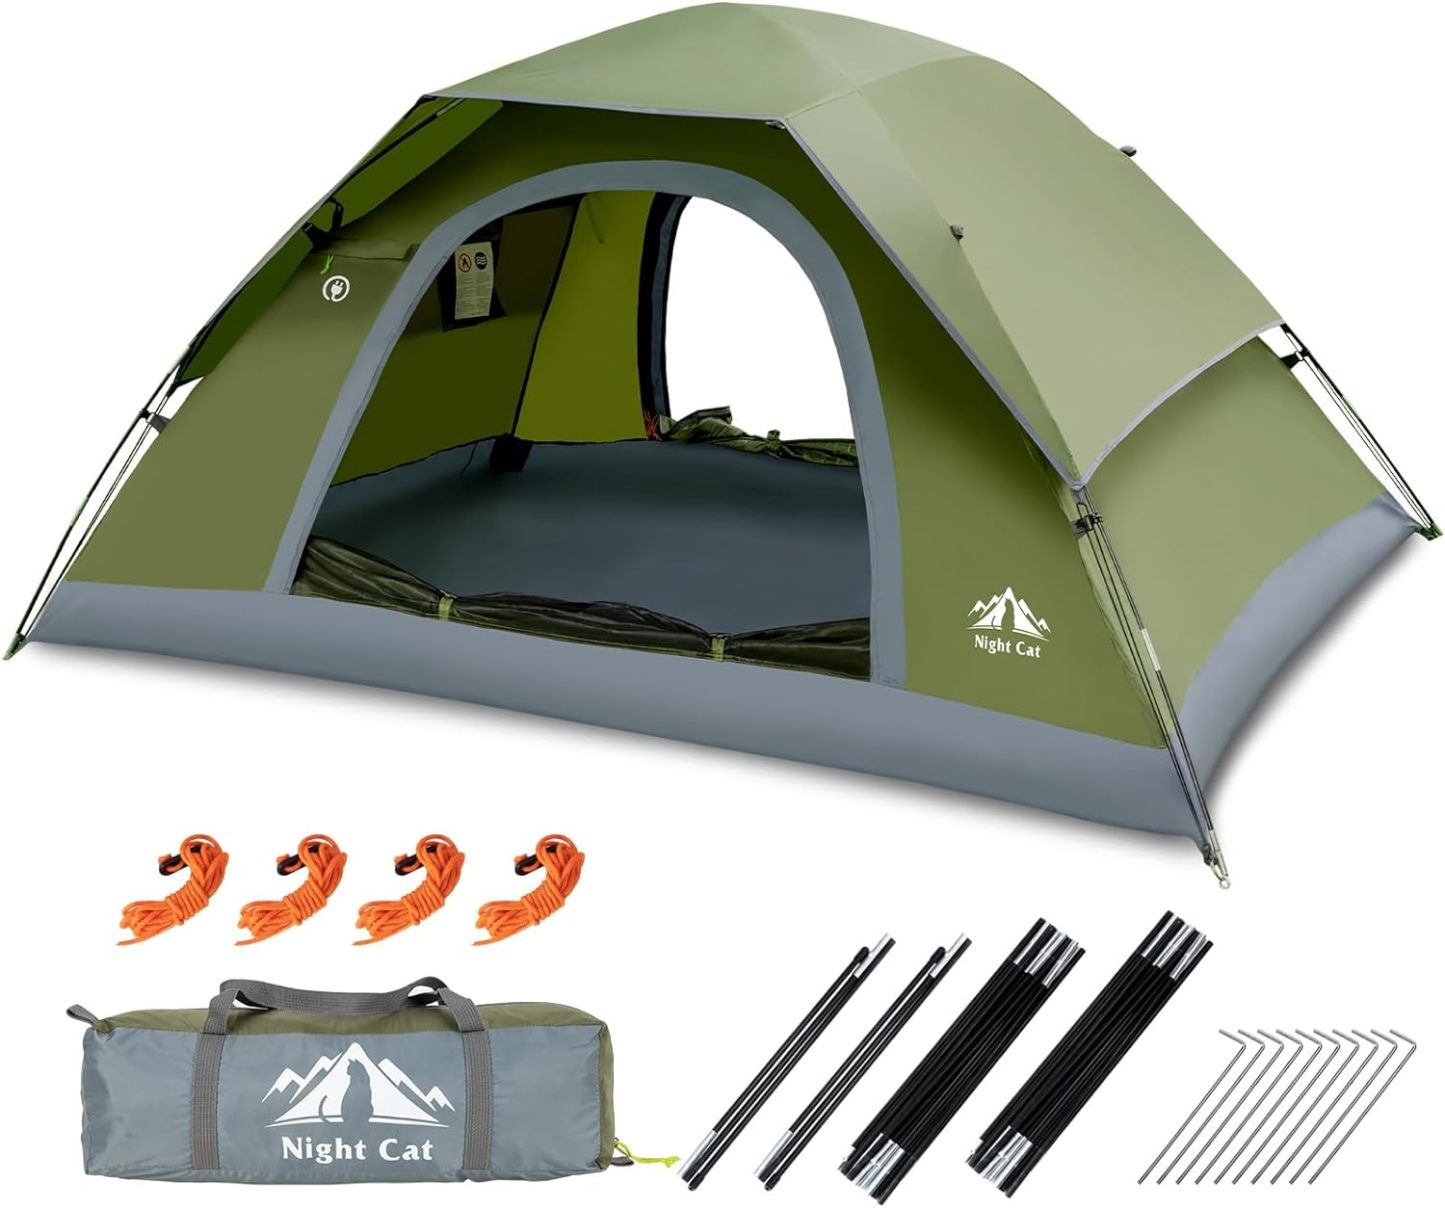 Night Cat Upgraded Backpacking Tents 1 2 Persons Easy Clip Setup Campi